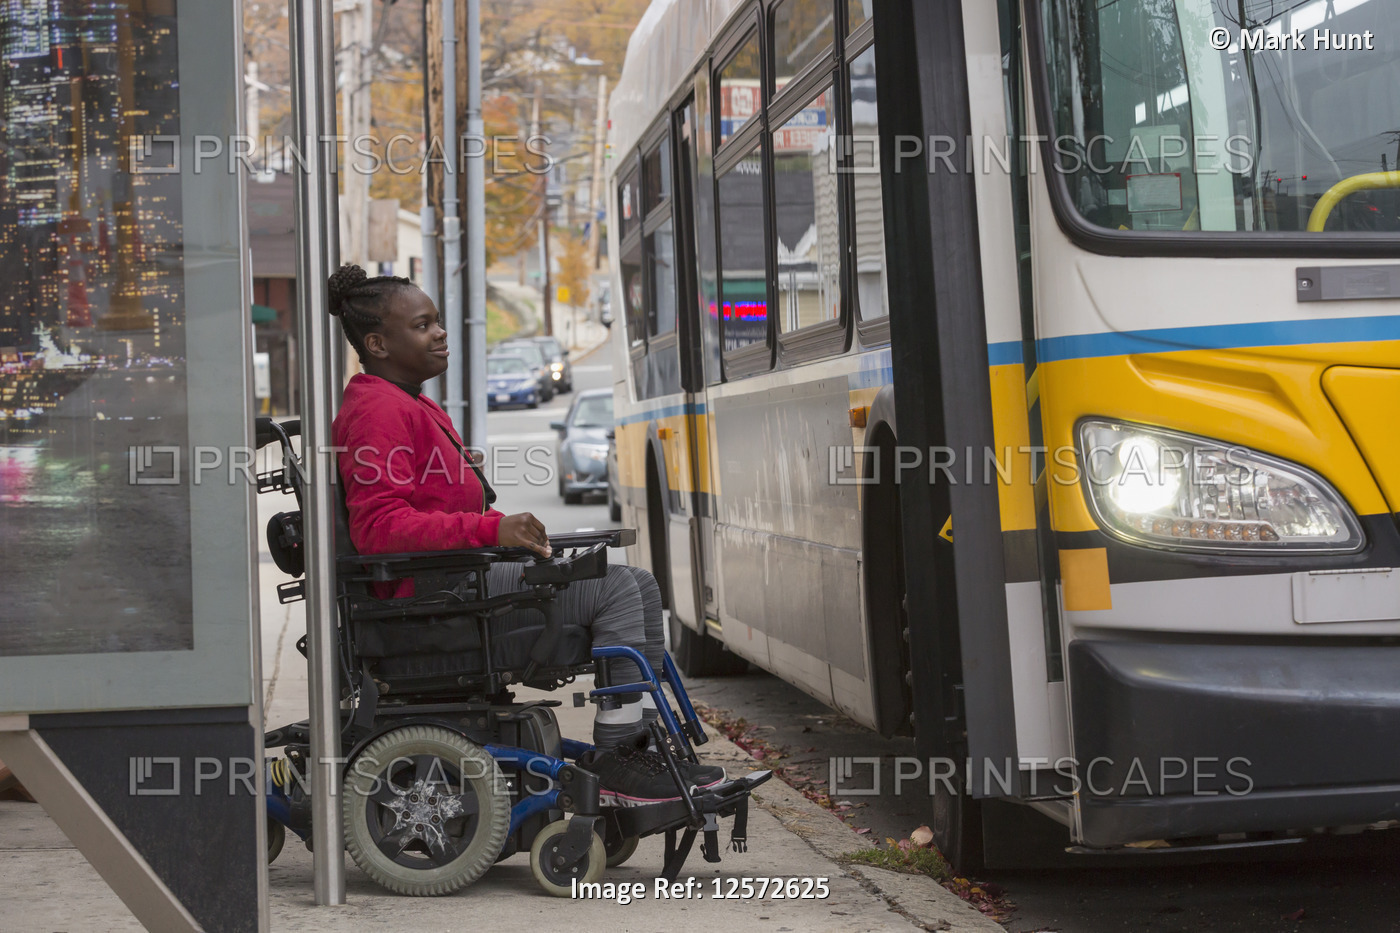 Teen with Cerebral Palsy at bus stop